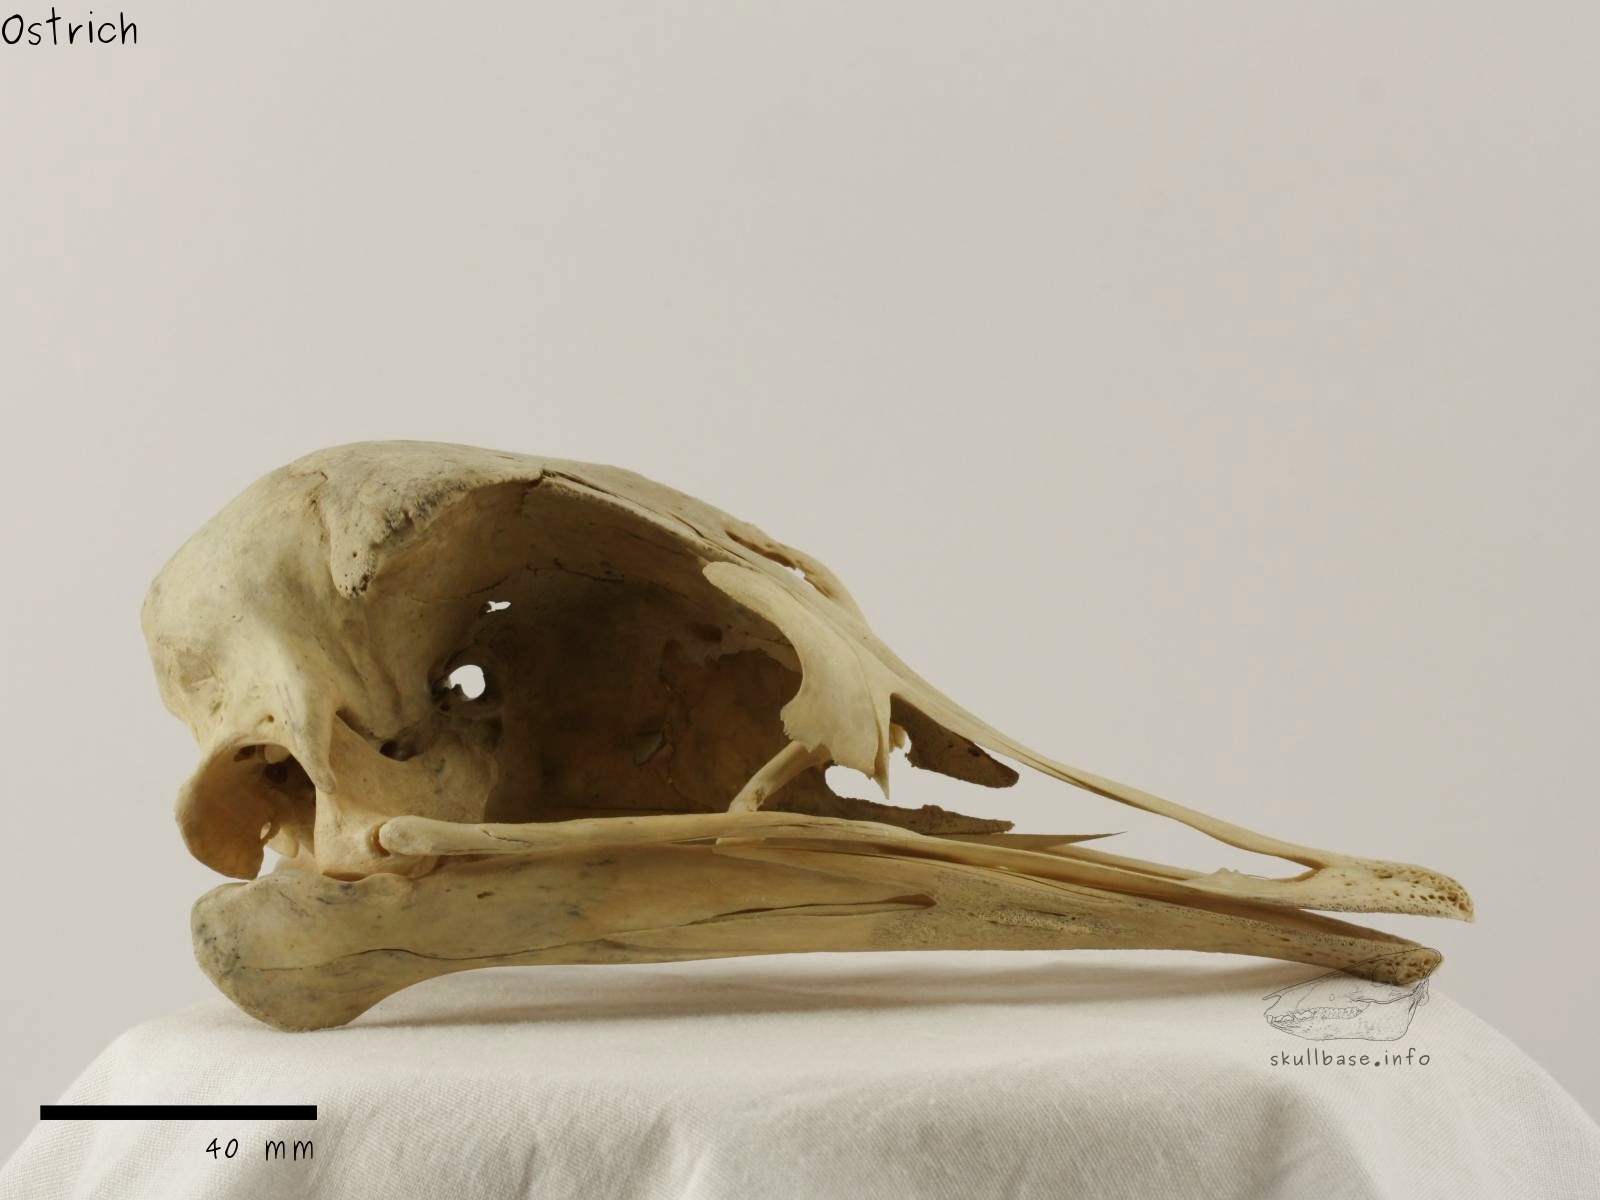 Ostrich (Struthio camelus) skull lateral view